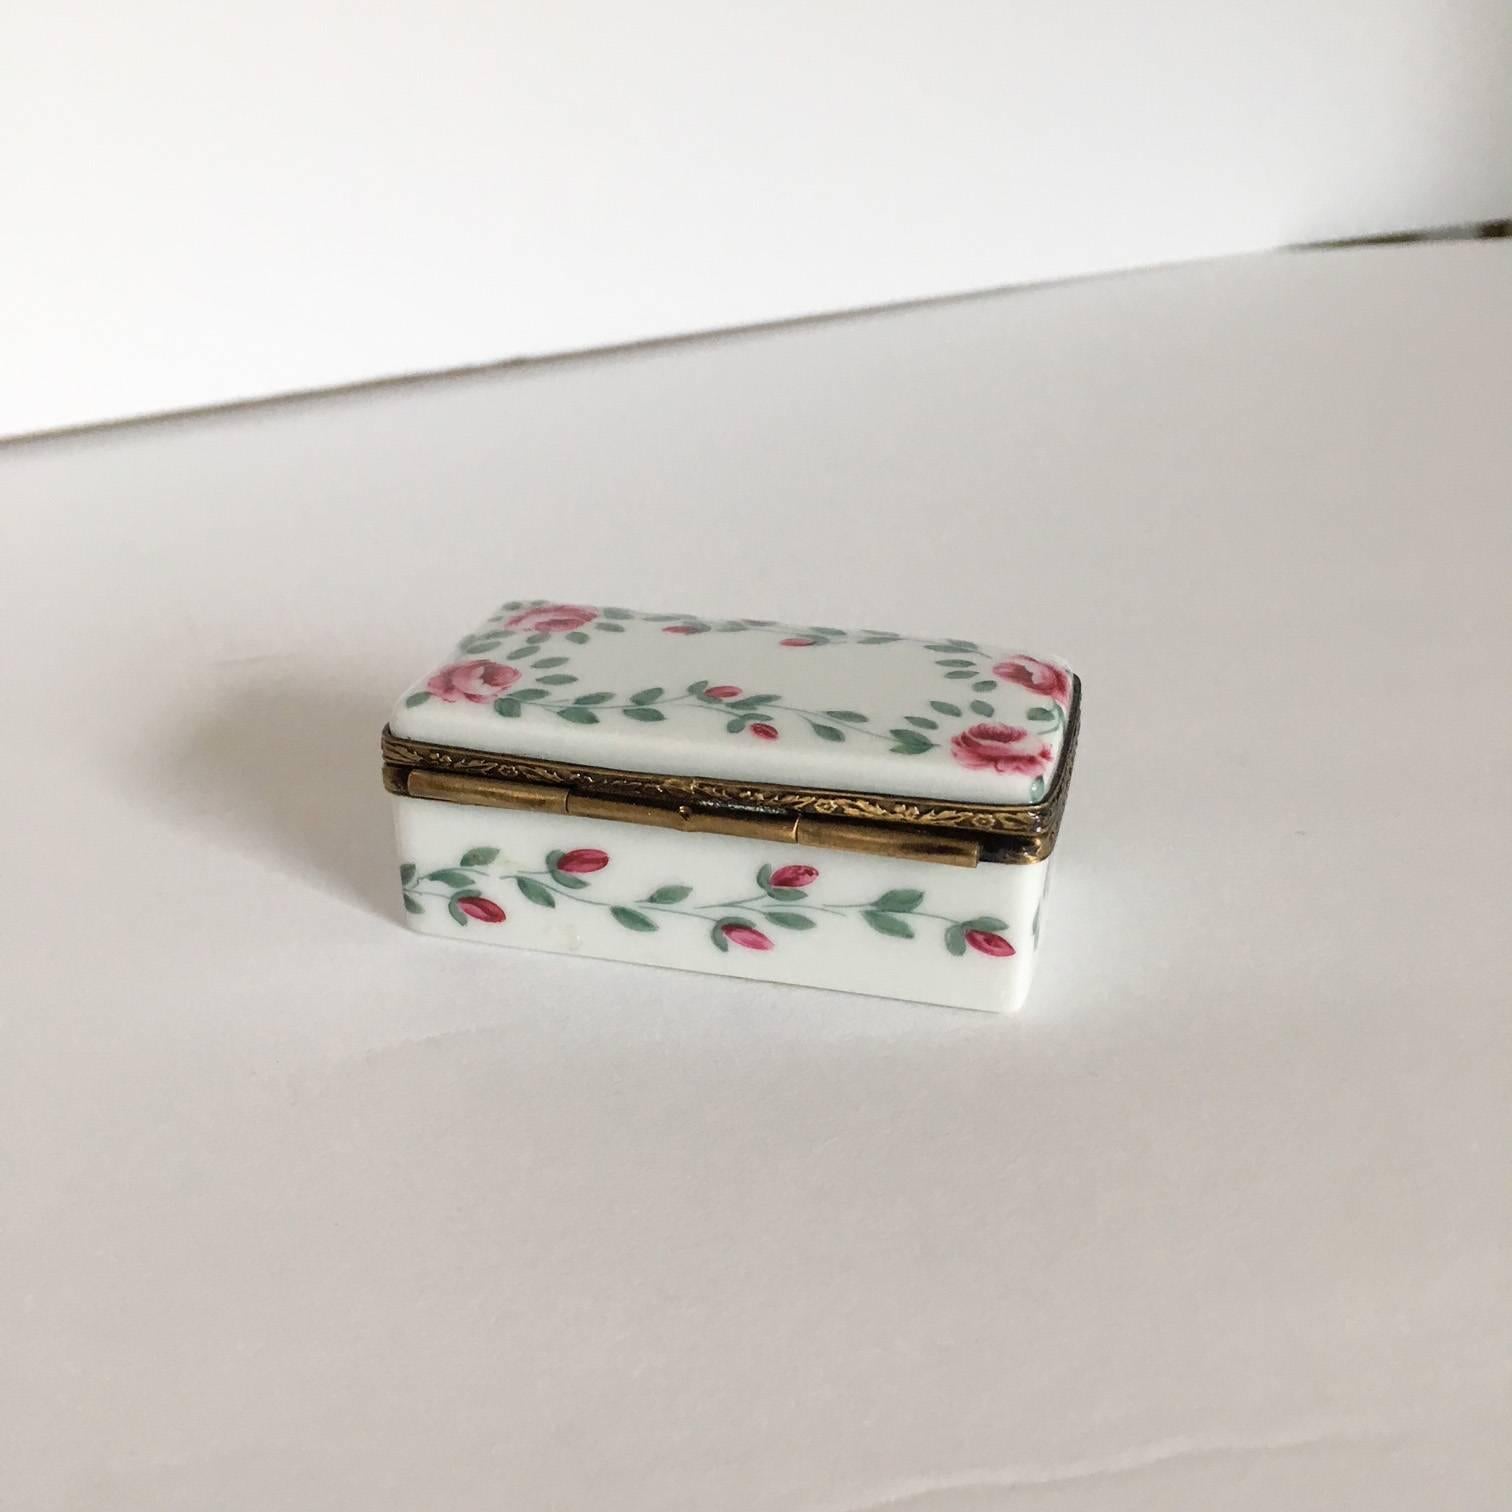 Hand-Painted Limoges Rose Box with Pink High Heels